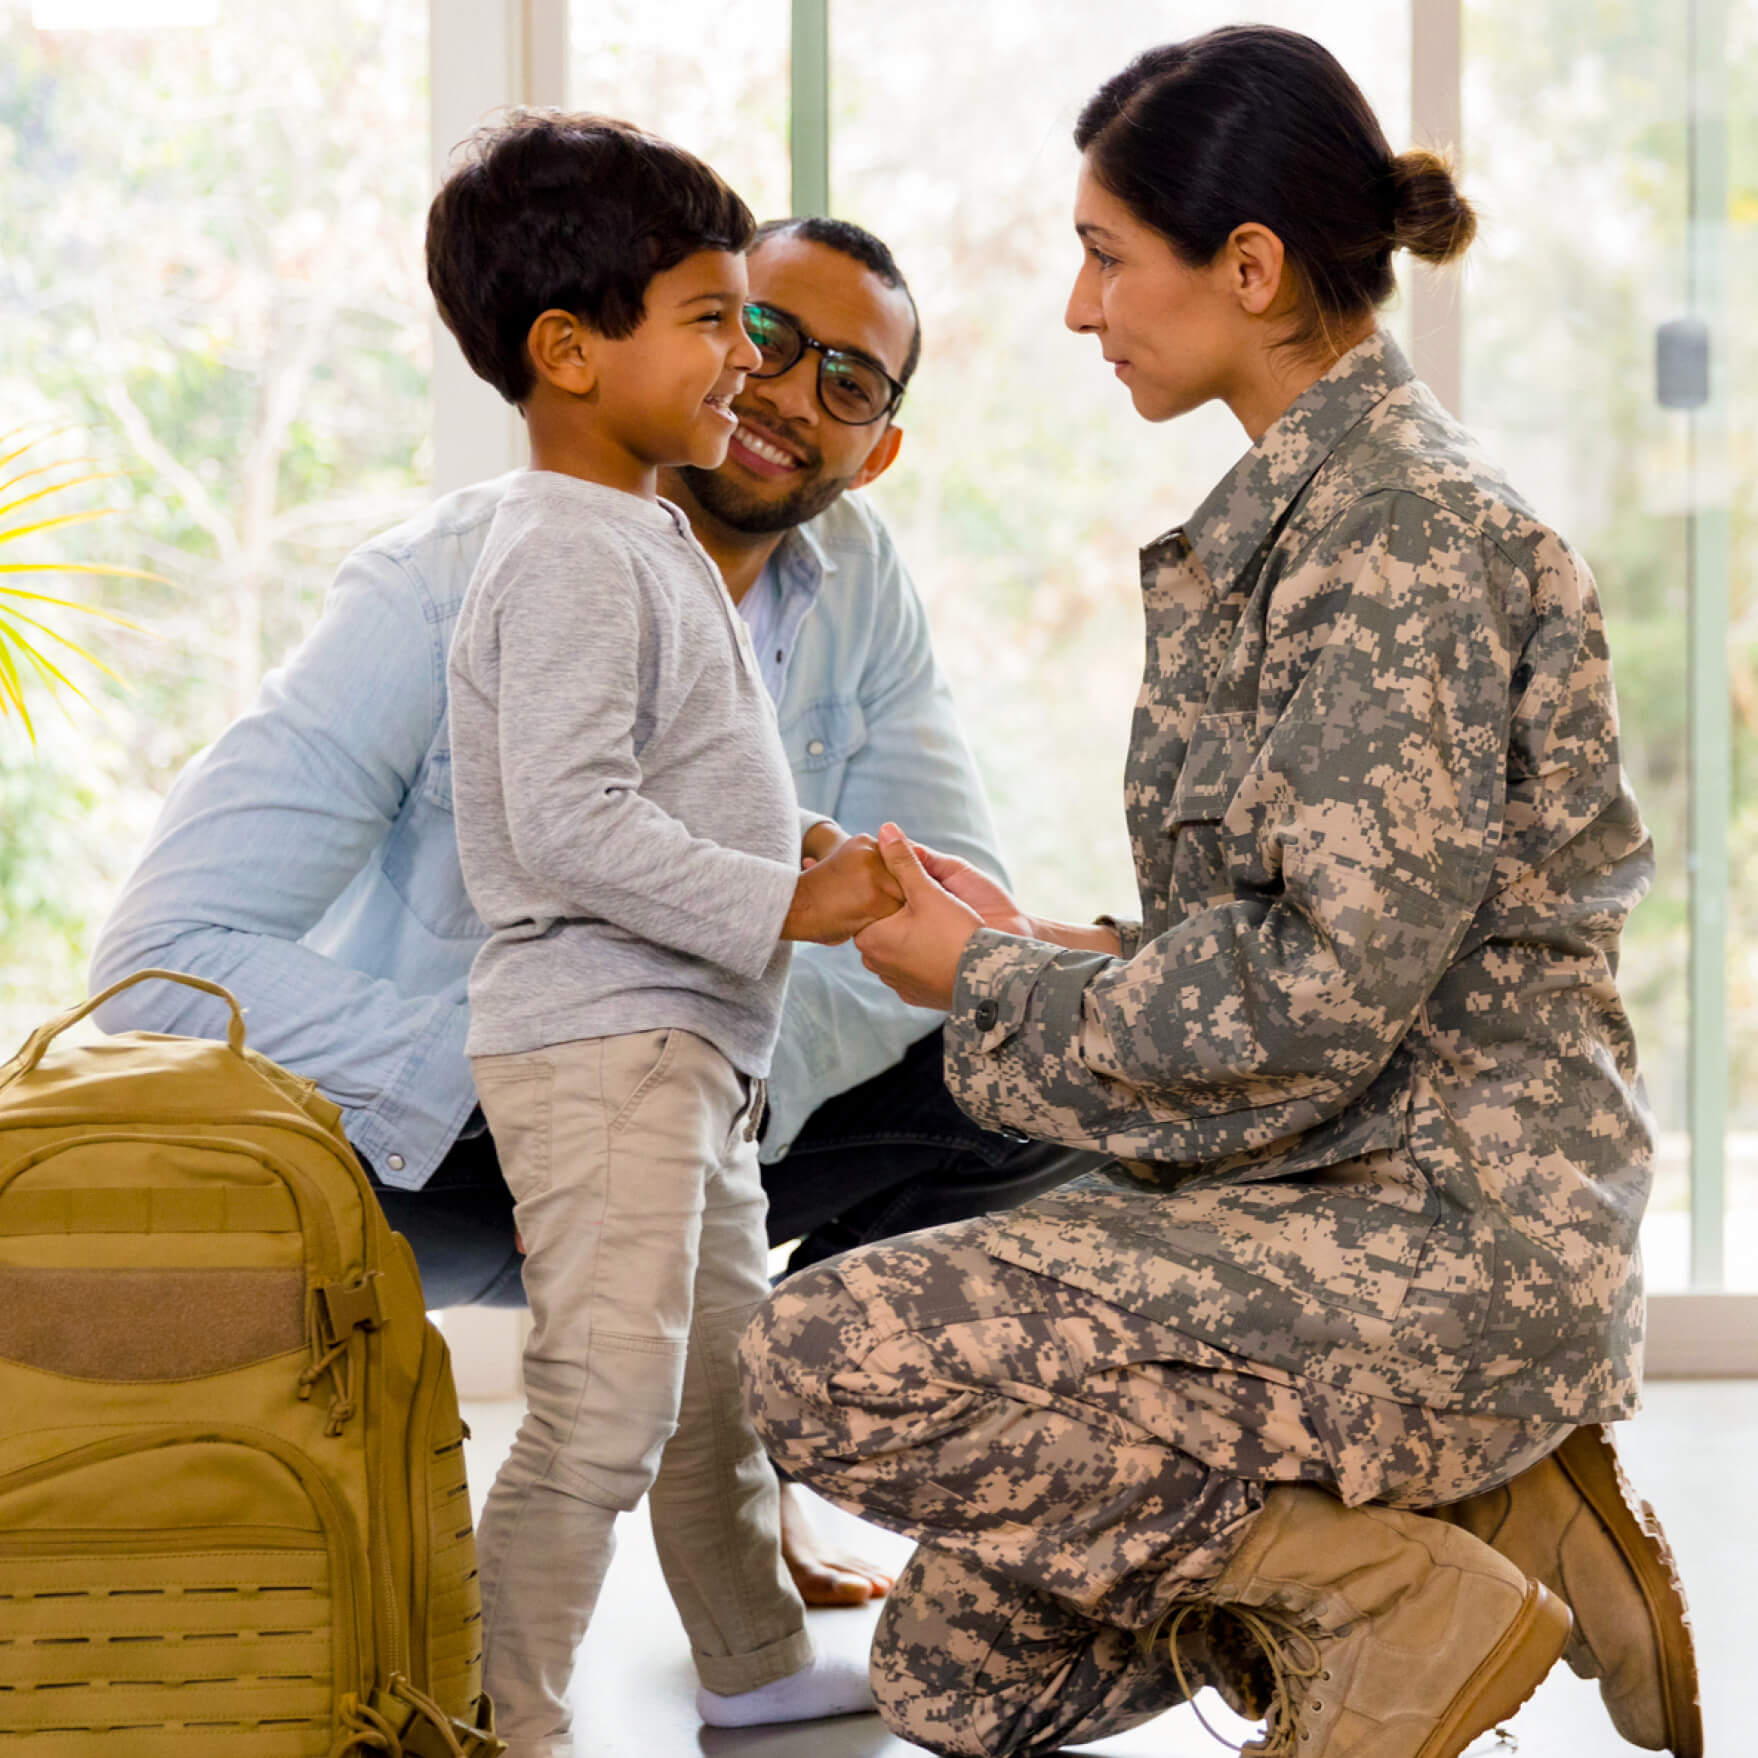 Capital One military mom kneels in uniform with her young son